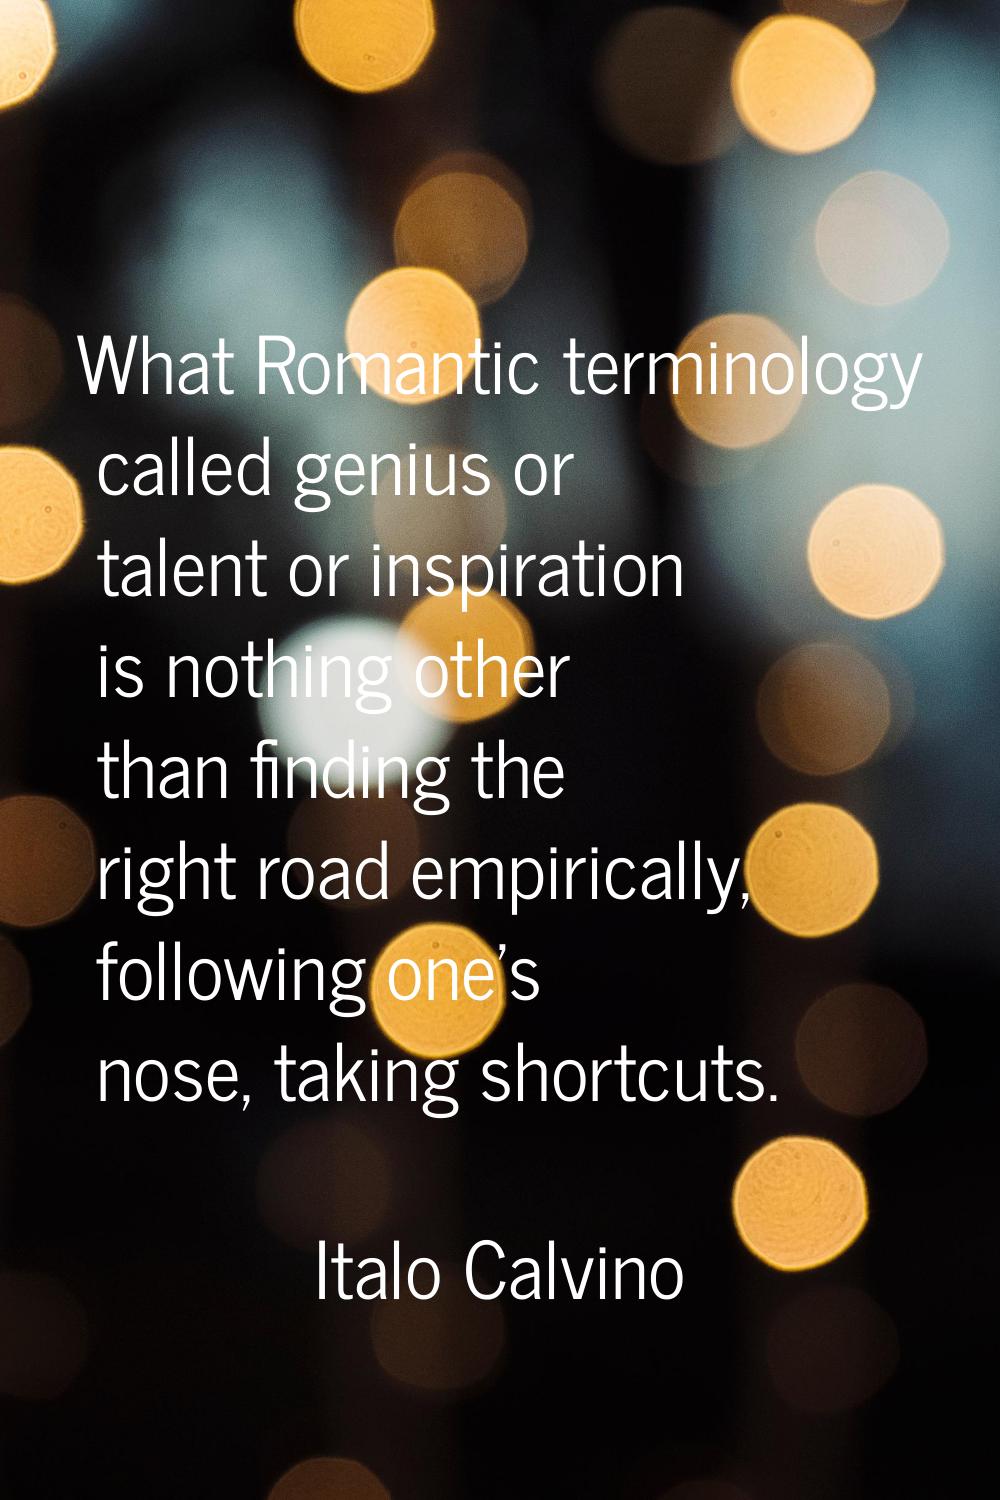 What Romantic terminology called genius or talent or inspiration is nothing other than finding the 